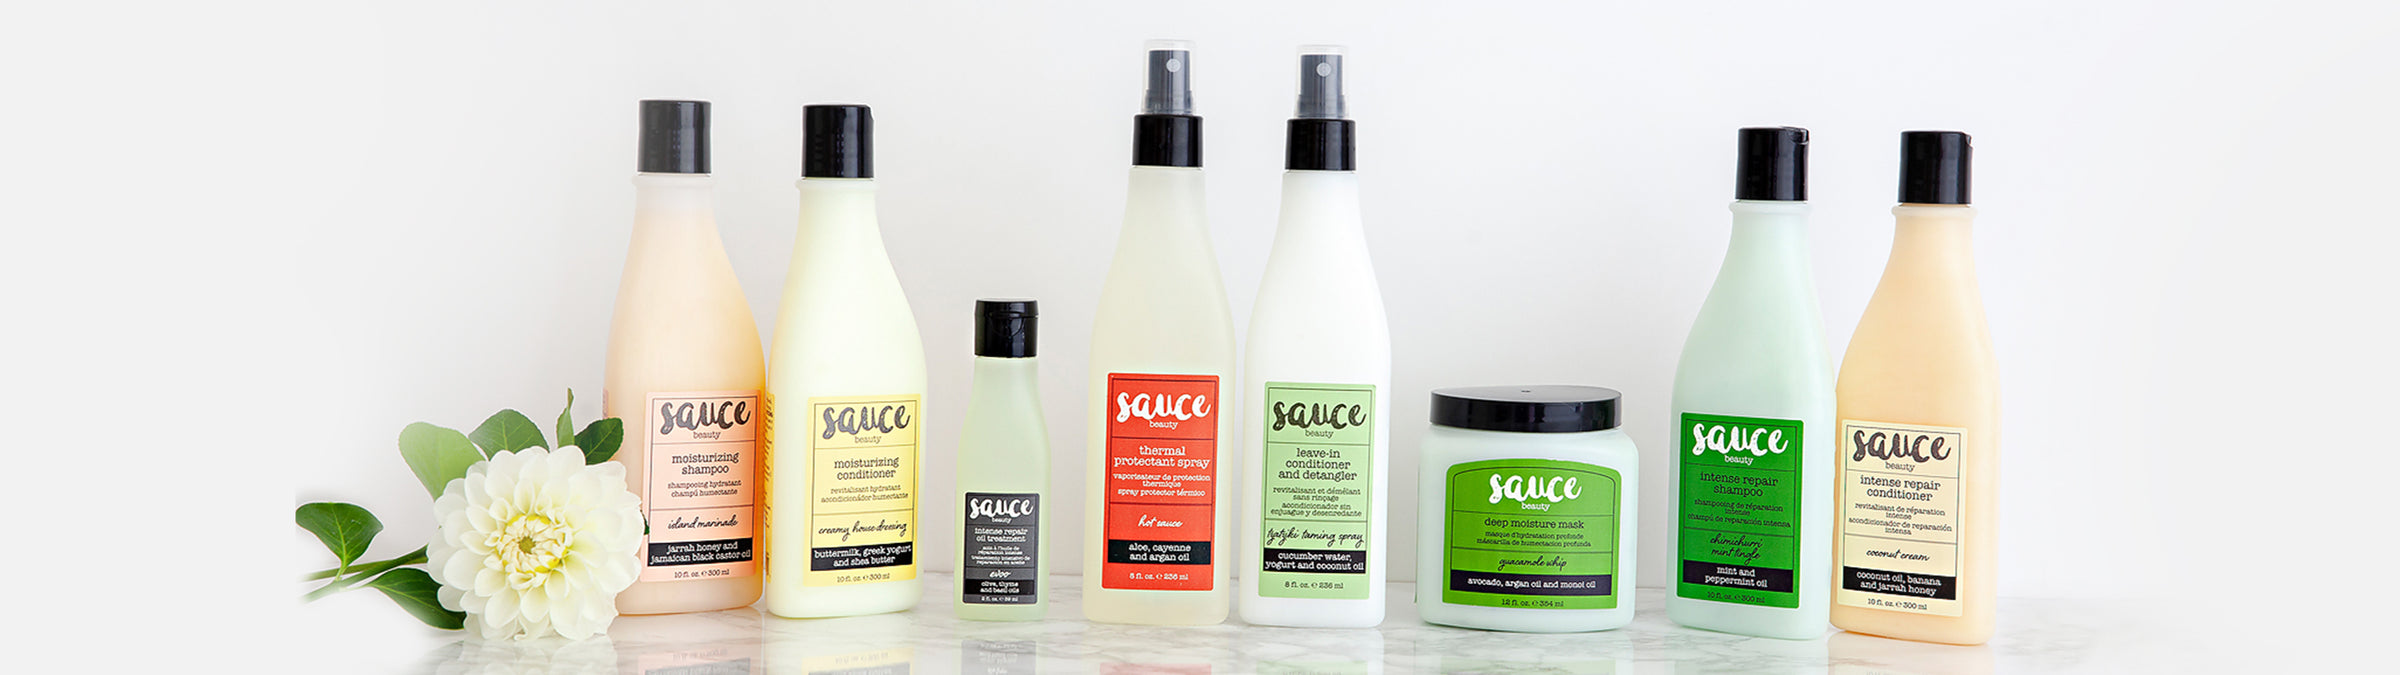 Sauce Beauty products